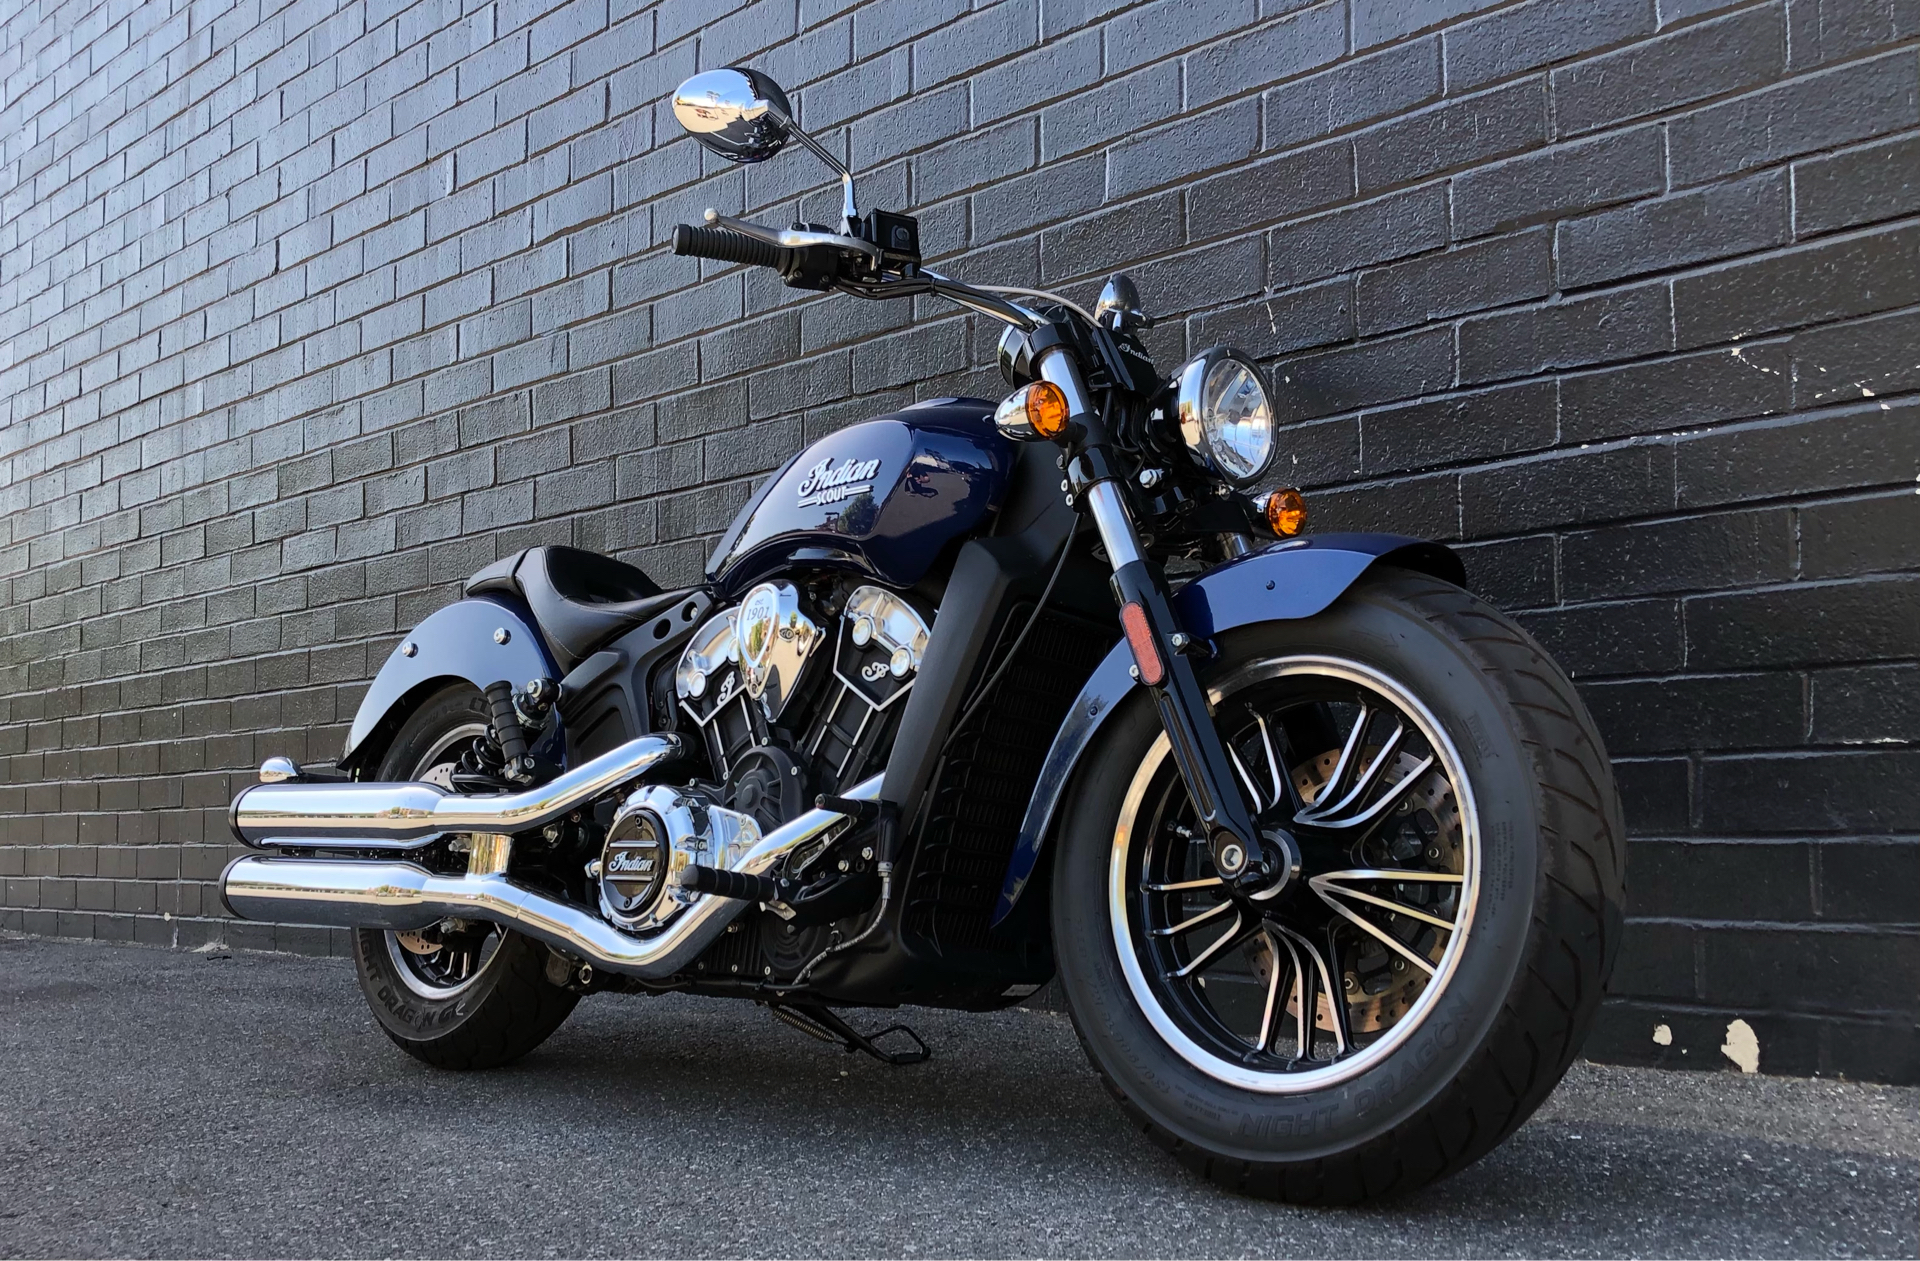 2021 Indian Scout® ABS in San Jose, California - Photo 2